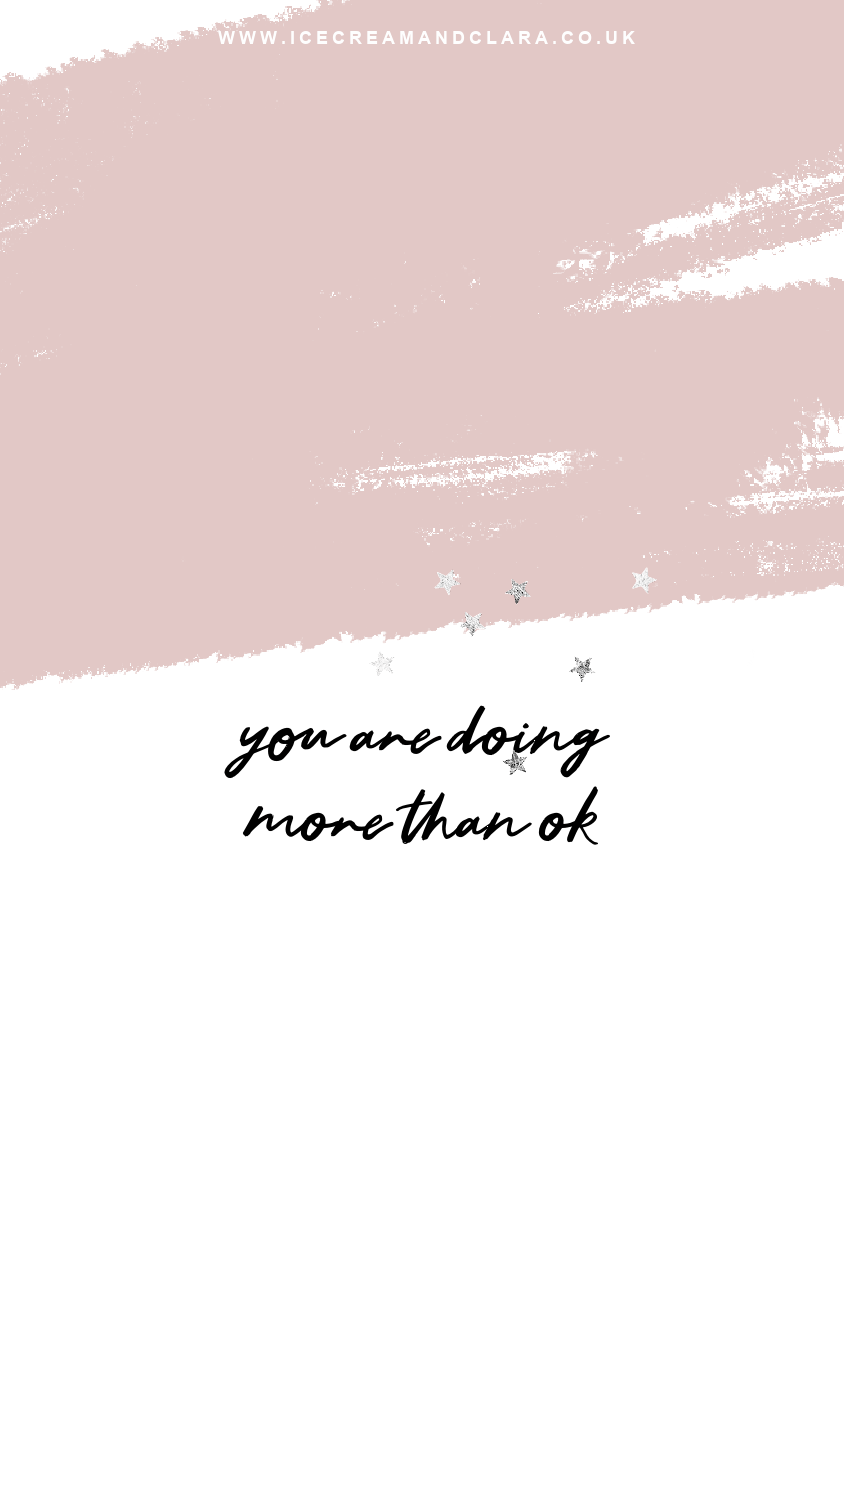 You are doing more than ok - Cute